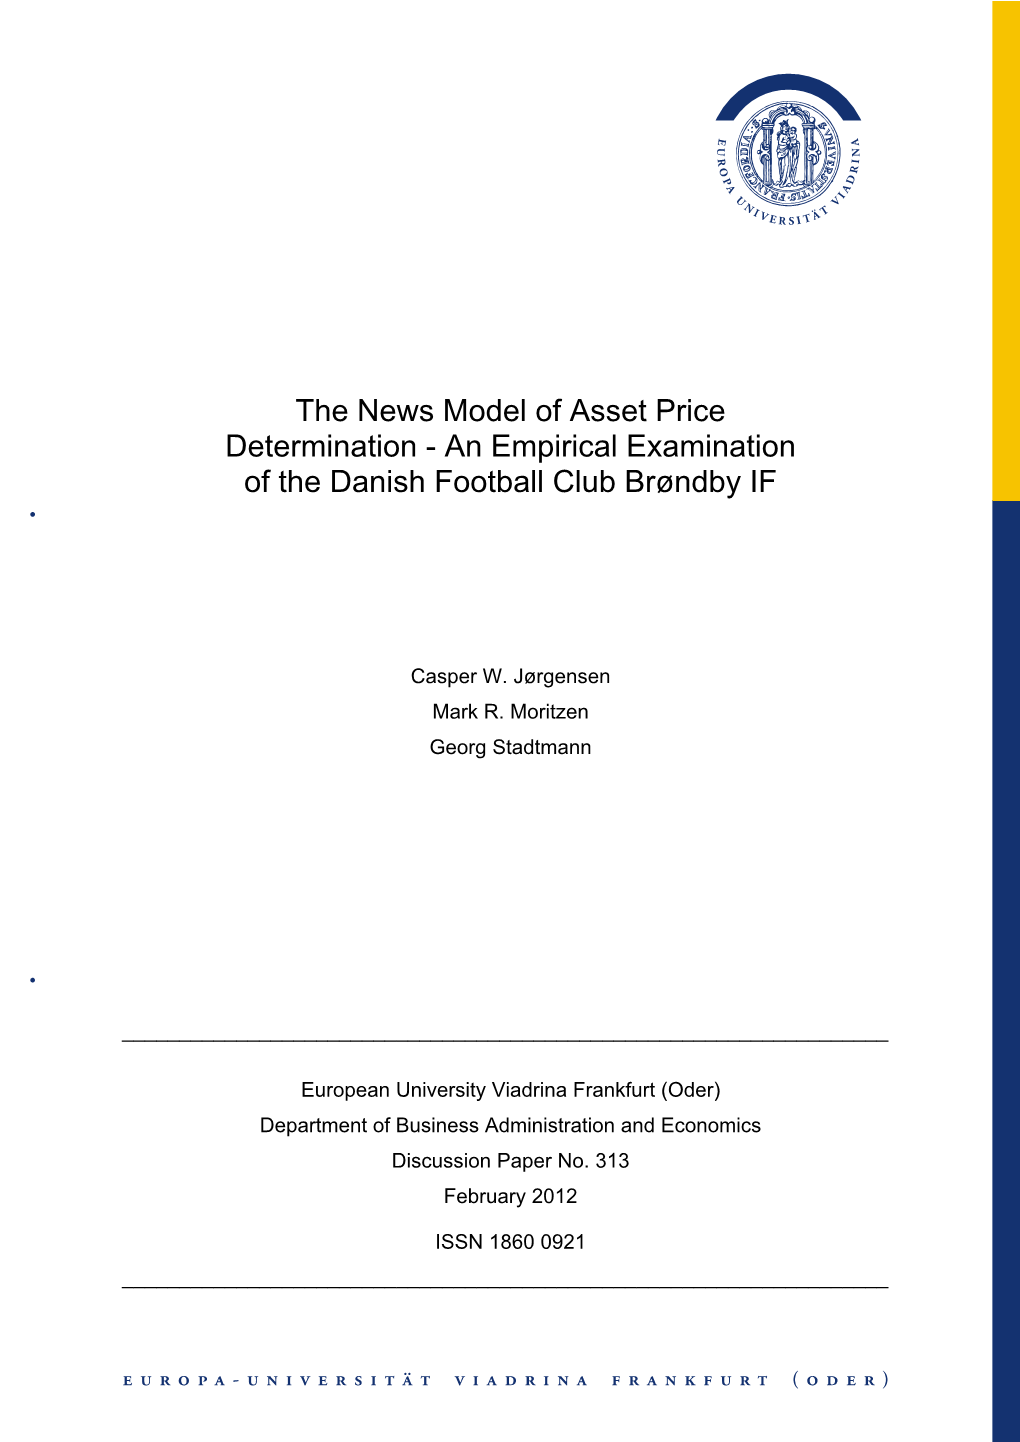 The News Model of Asset Price Determination - an Empirical Examination of the Danish Football Club Brøndby IF